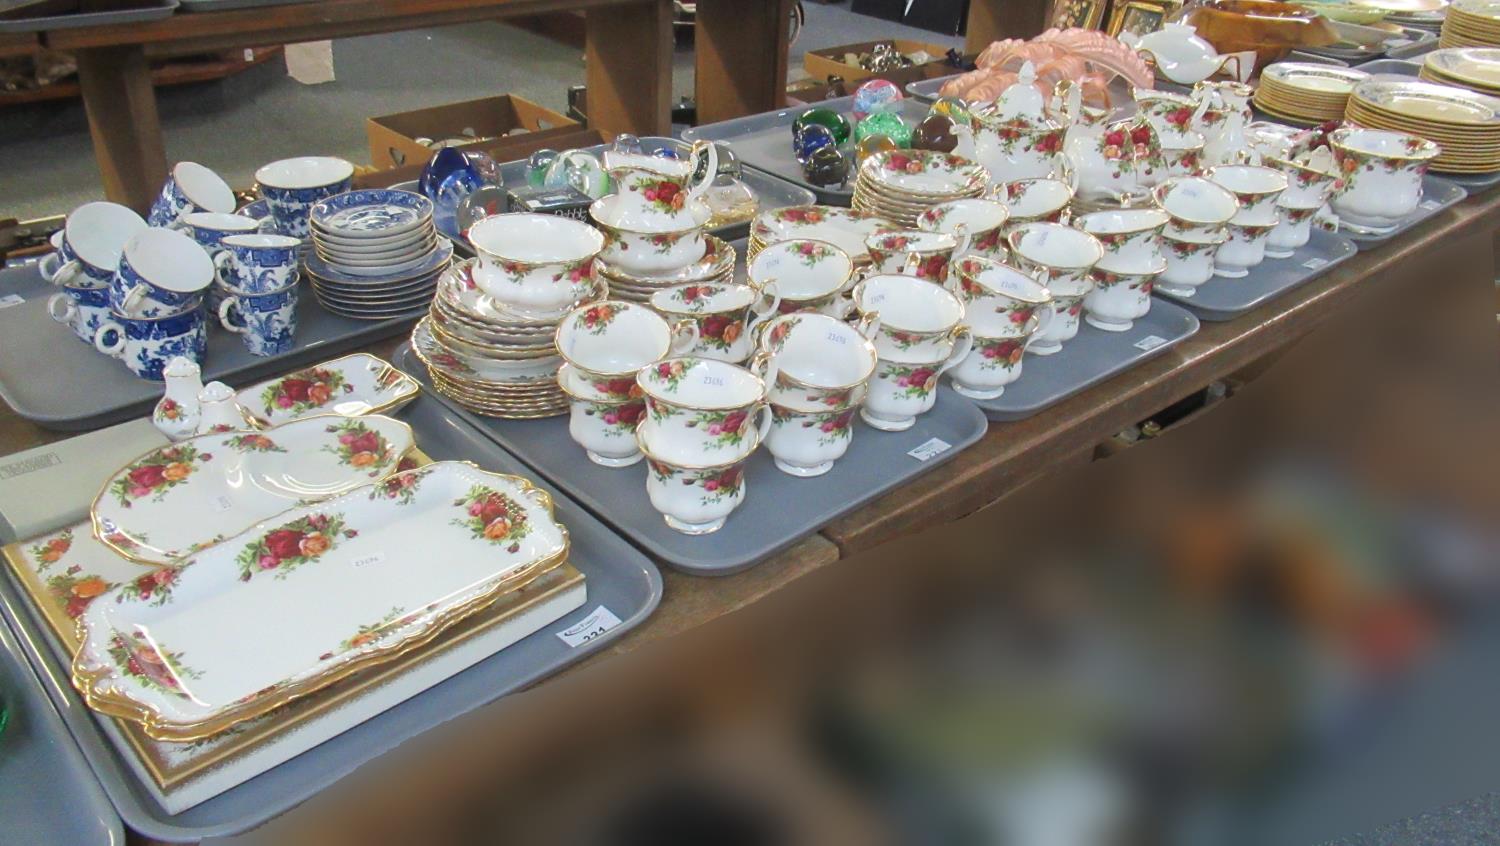 Five trays of Royal Albert fine bone china 'Old Country Roses' design teaware and other items